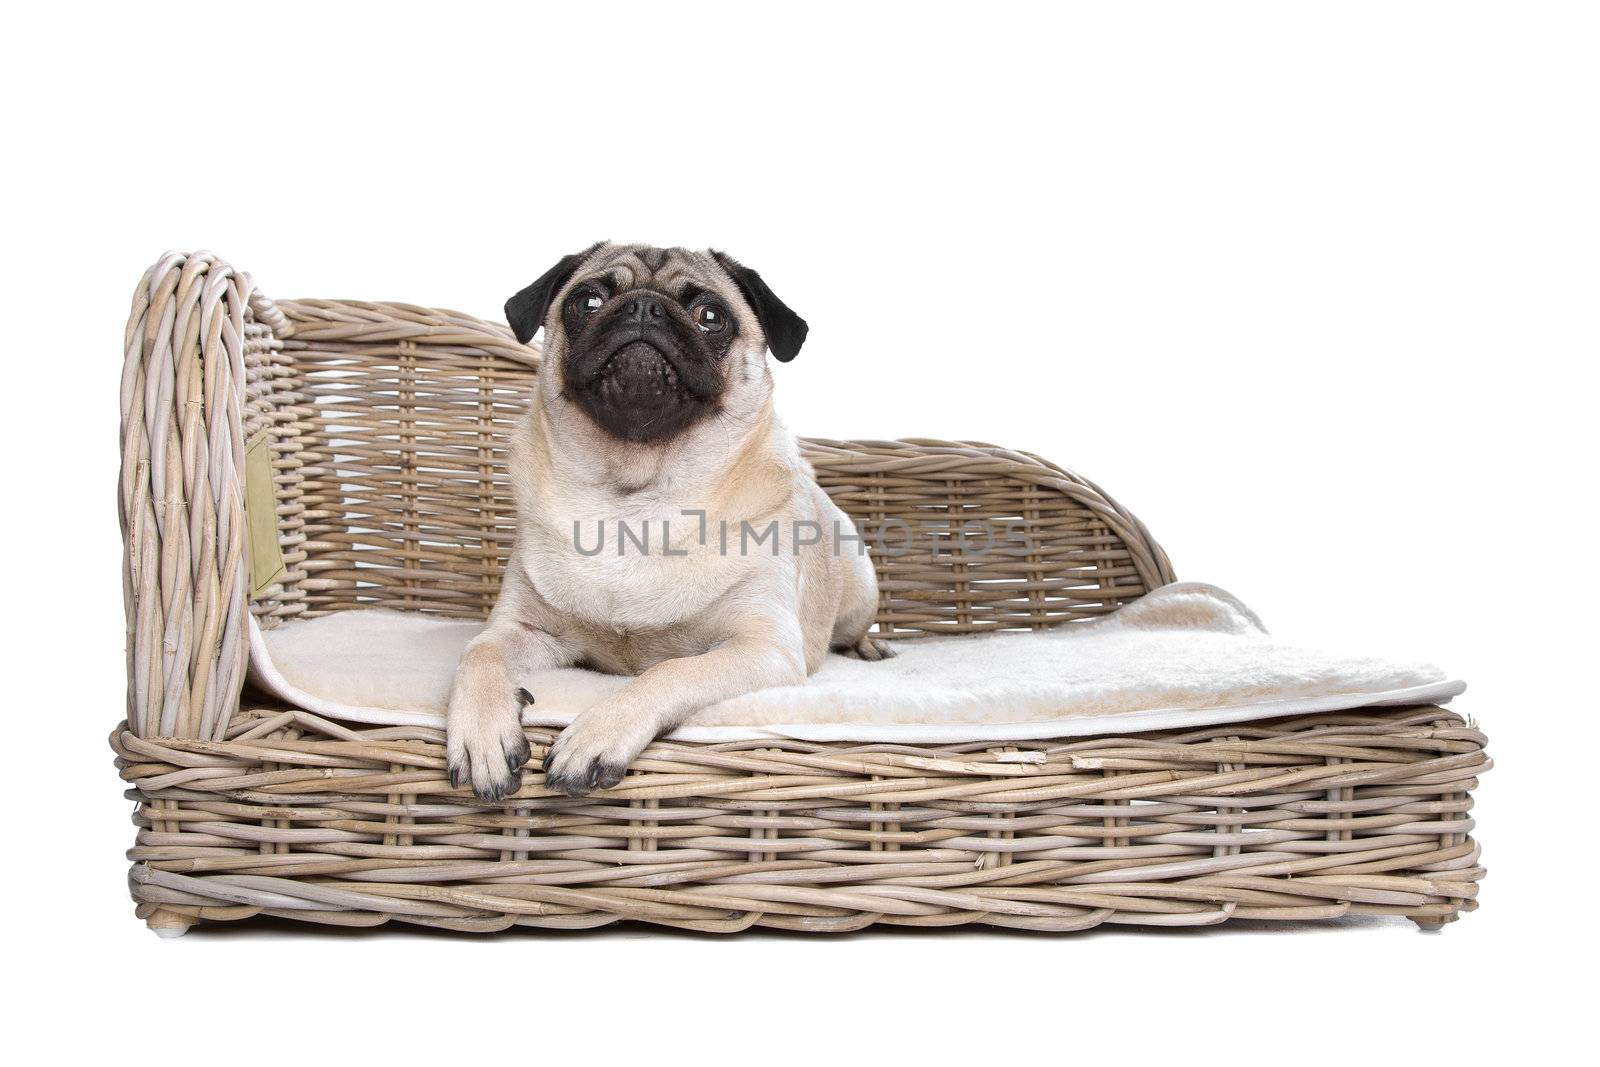 Pug on a luxury bed by eriklam